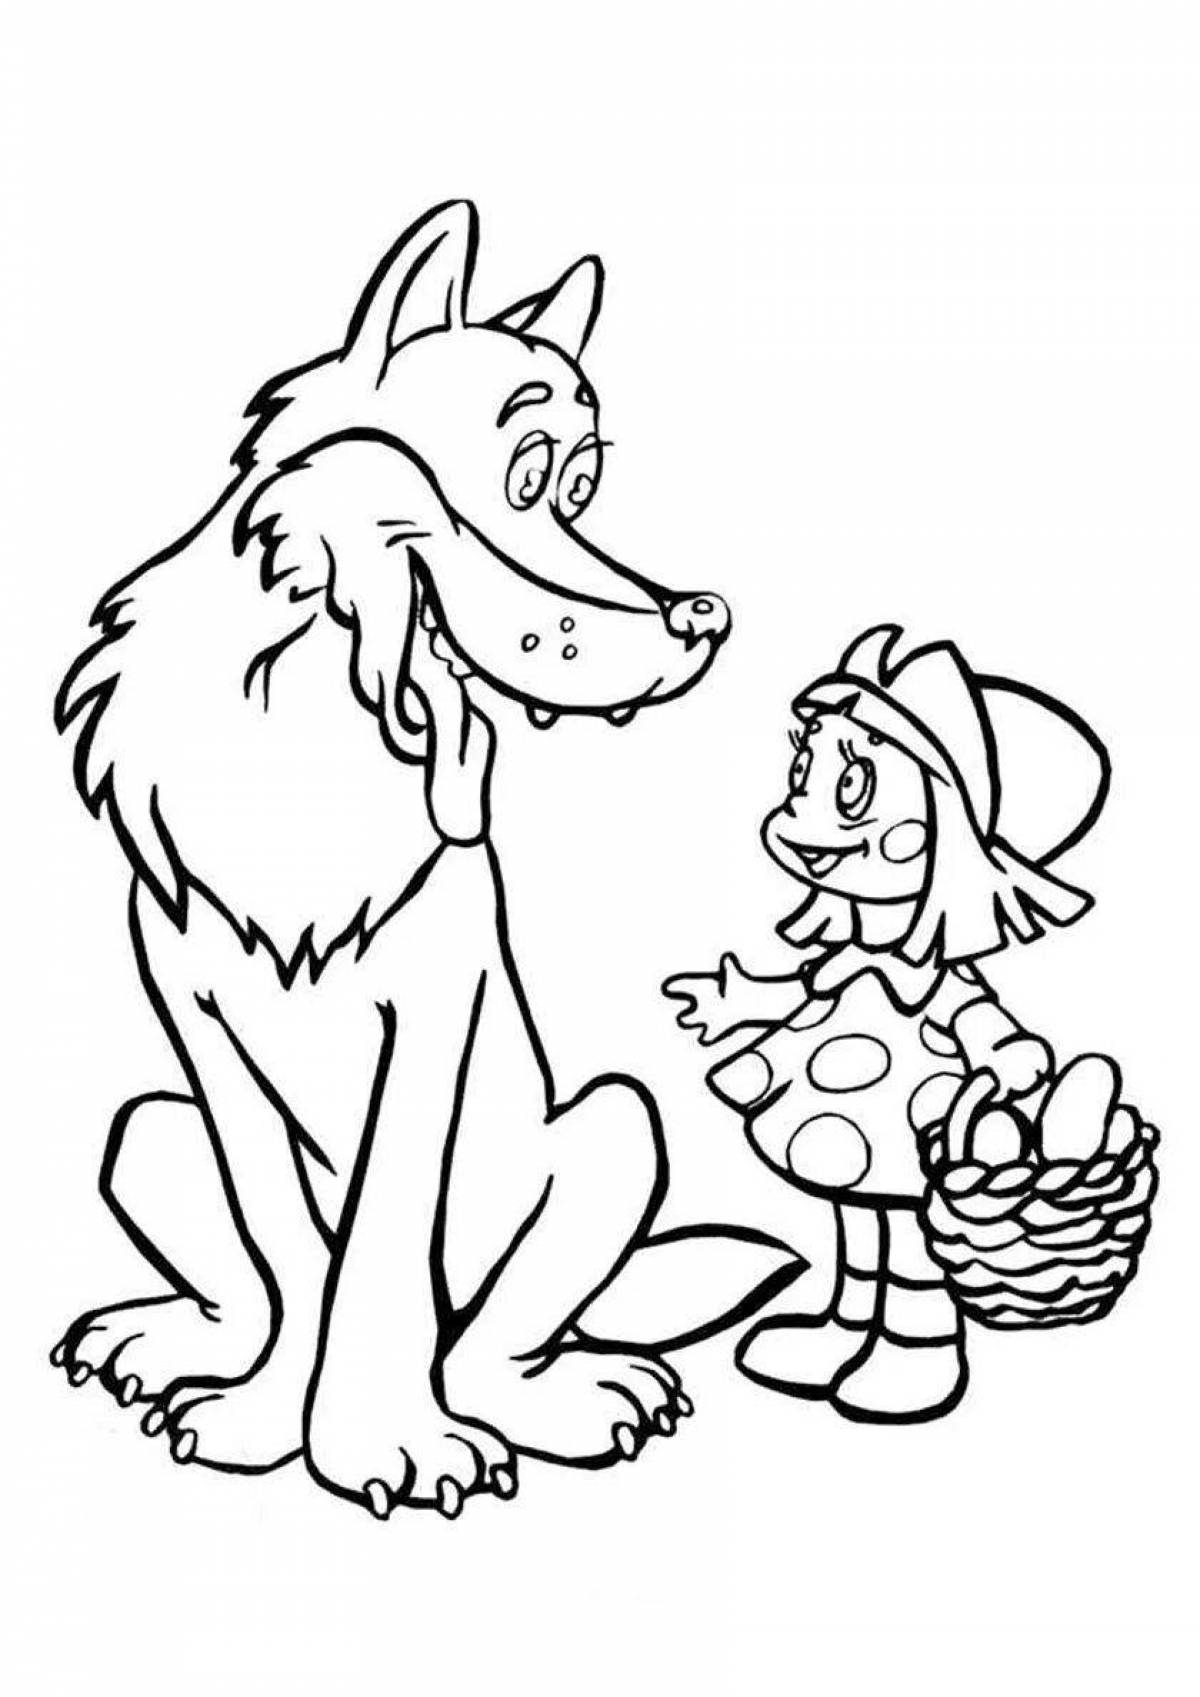 Colorful gray wolf and little red riding hood coloring book